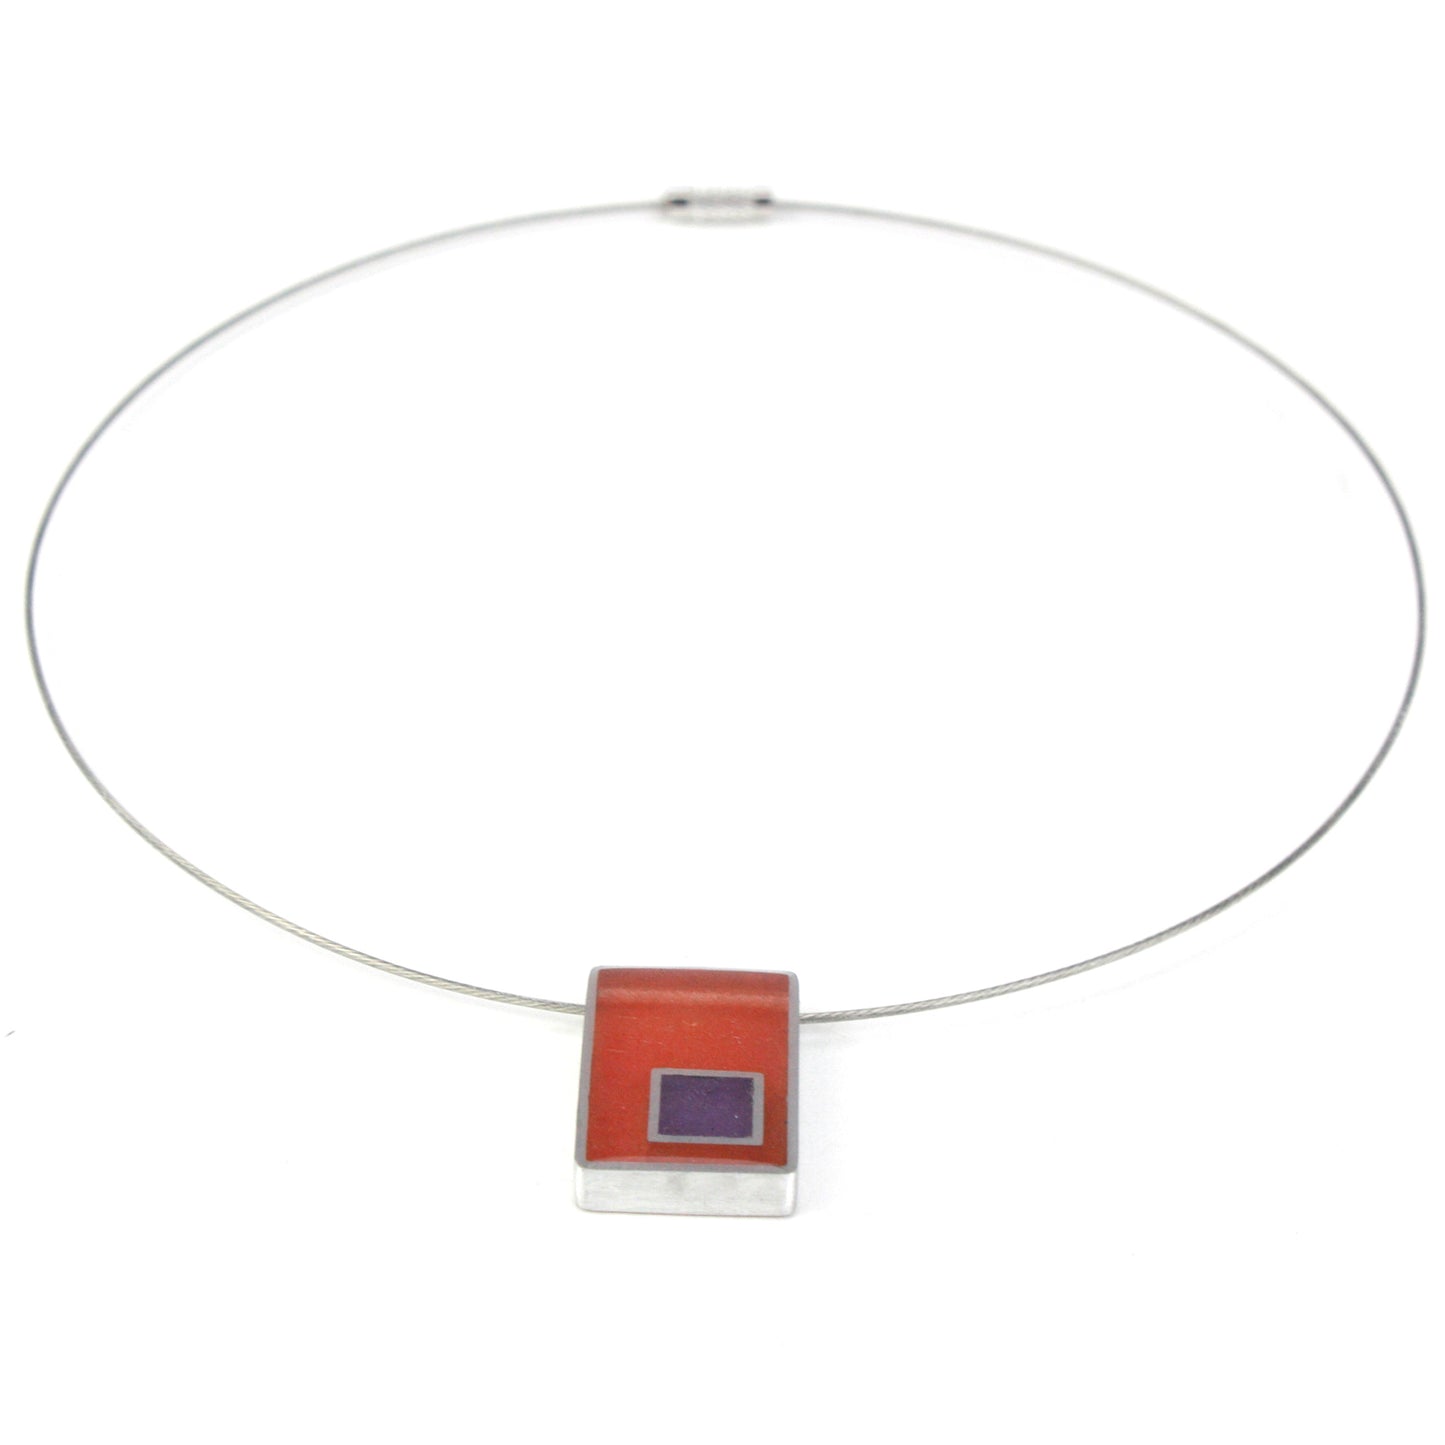 Resinique rectangle and square necklace - Light red and purple